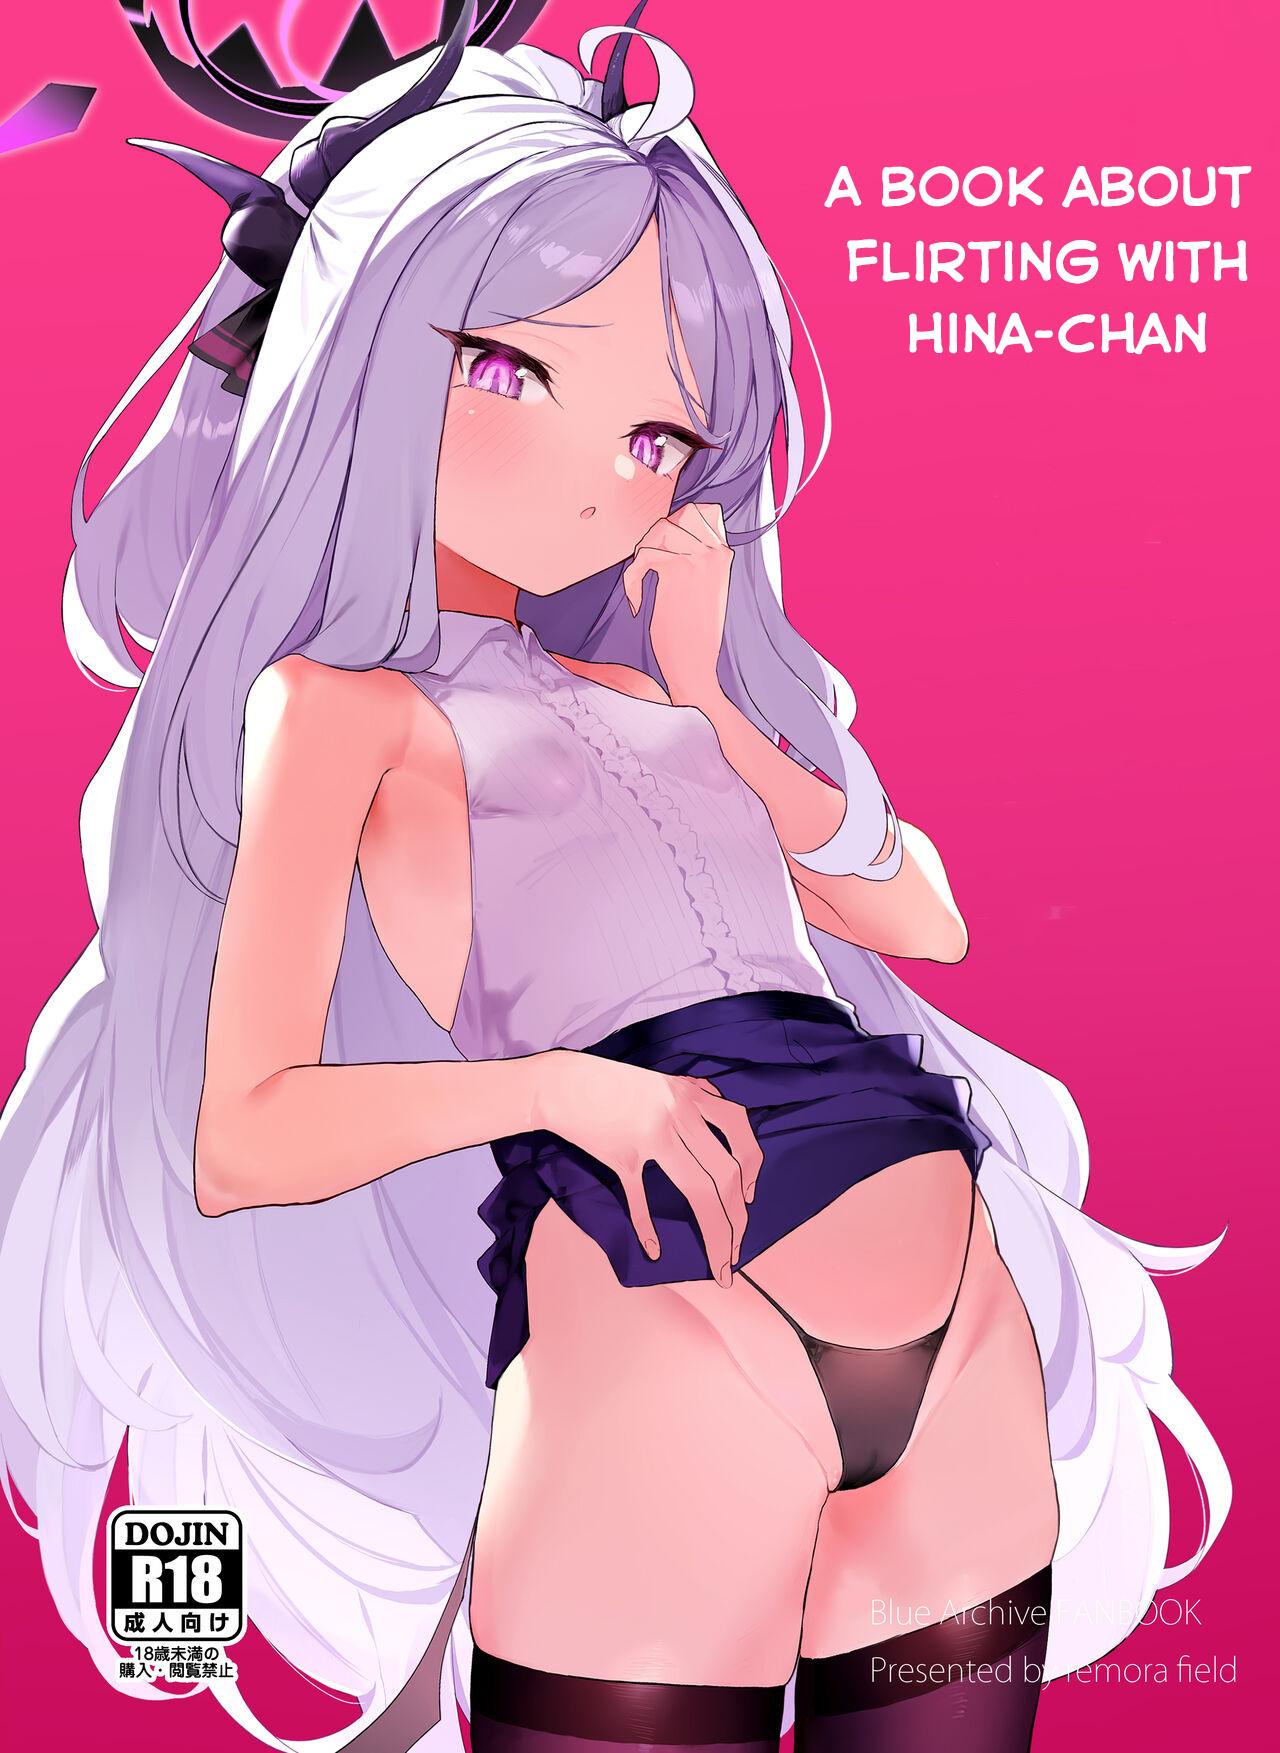 Salope [remora field (remora)] Hina-chan to Ichaicha Suru Hon | A book about flirting with Hina-chan (Blue Archive) [English] [Digital] - Blue archive Indian Sex - Picture 1